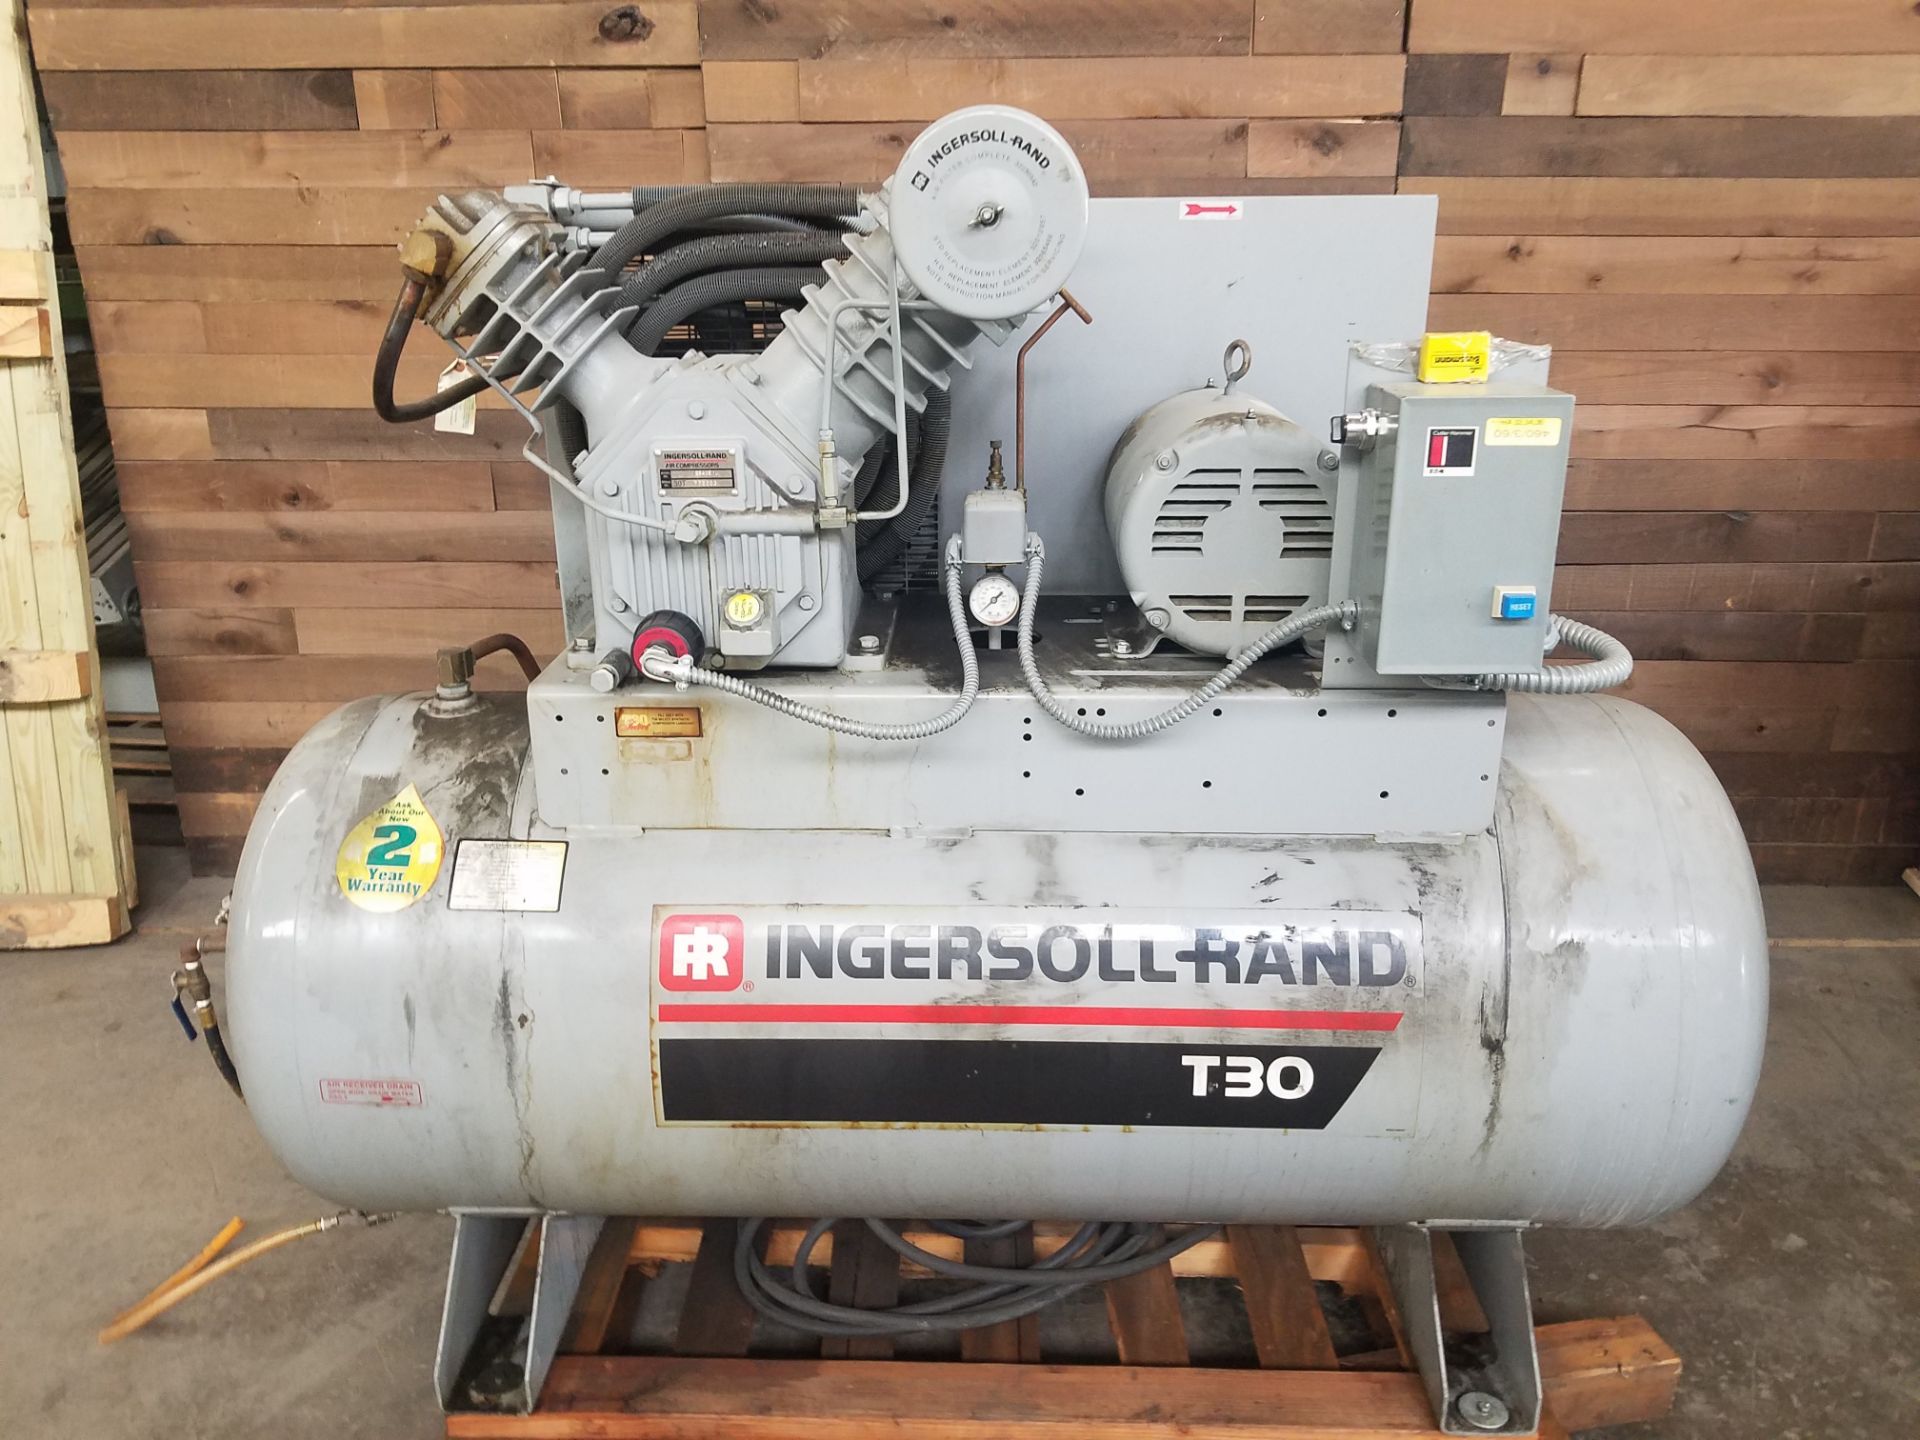 Ingersoll Rand 10 hp Air Compressor, Model T30 with 120 Gal. Tank, 230/460 V, 3 Phase